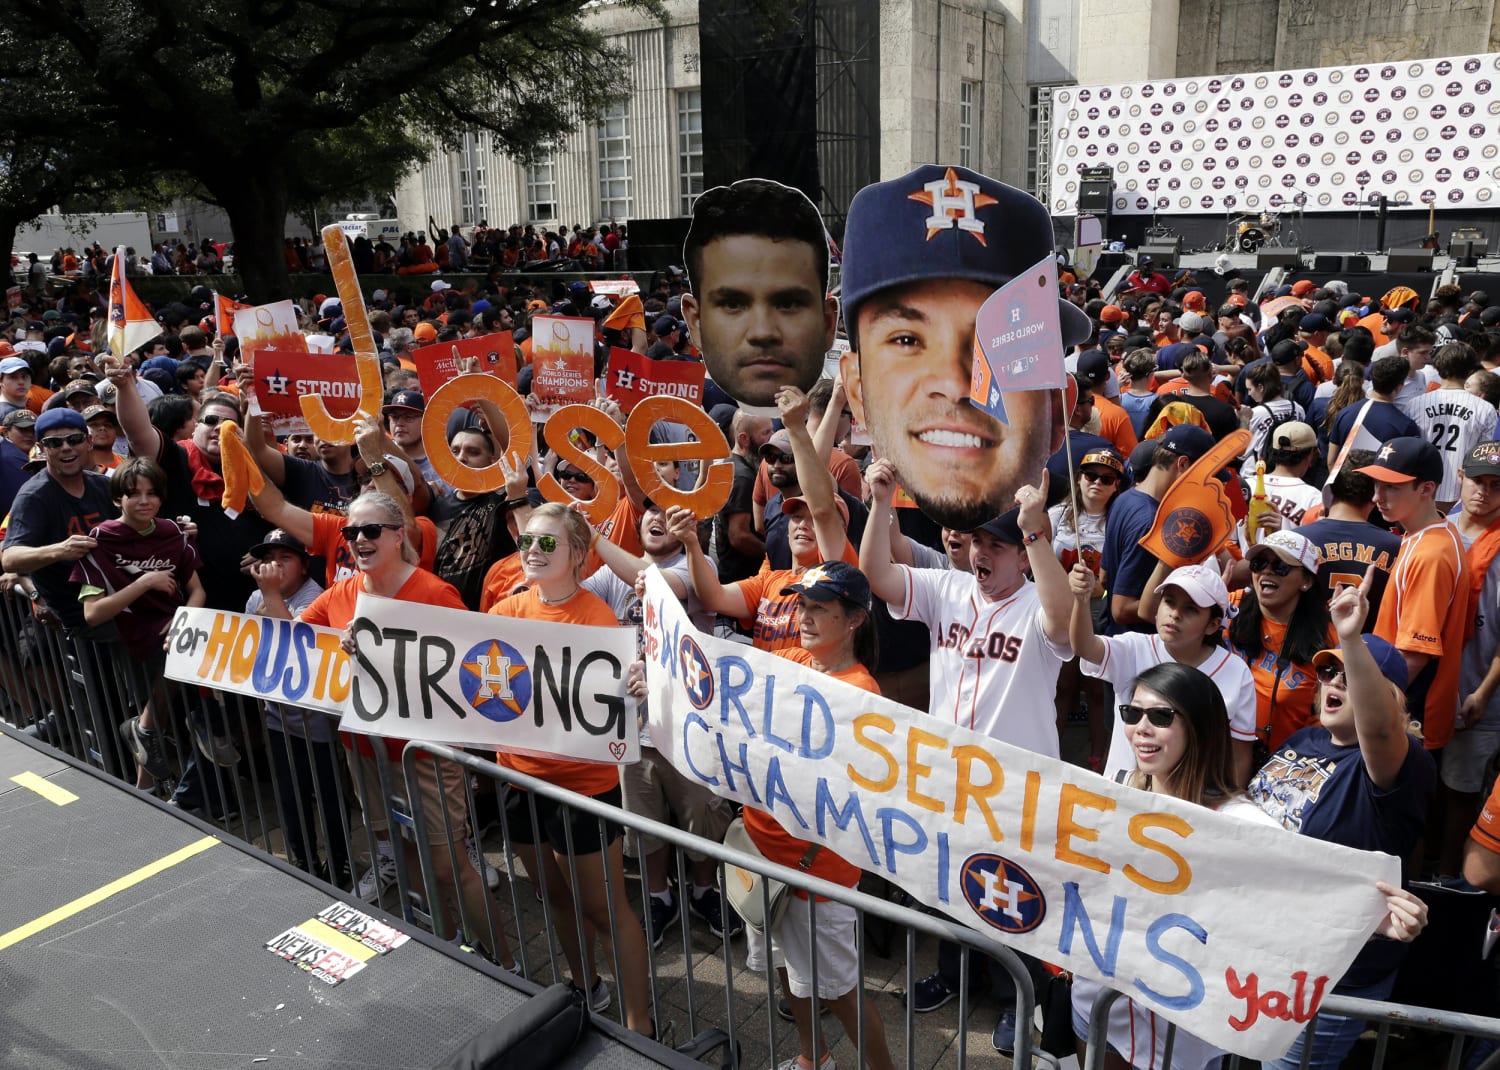 Celebrating the Champions: Buzz Residents at the Astros Parade